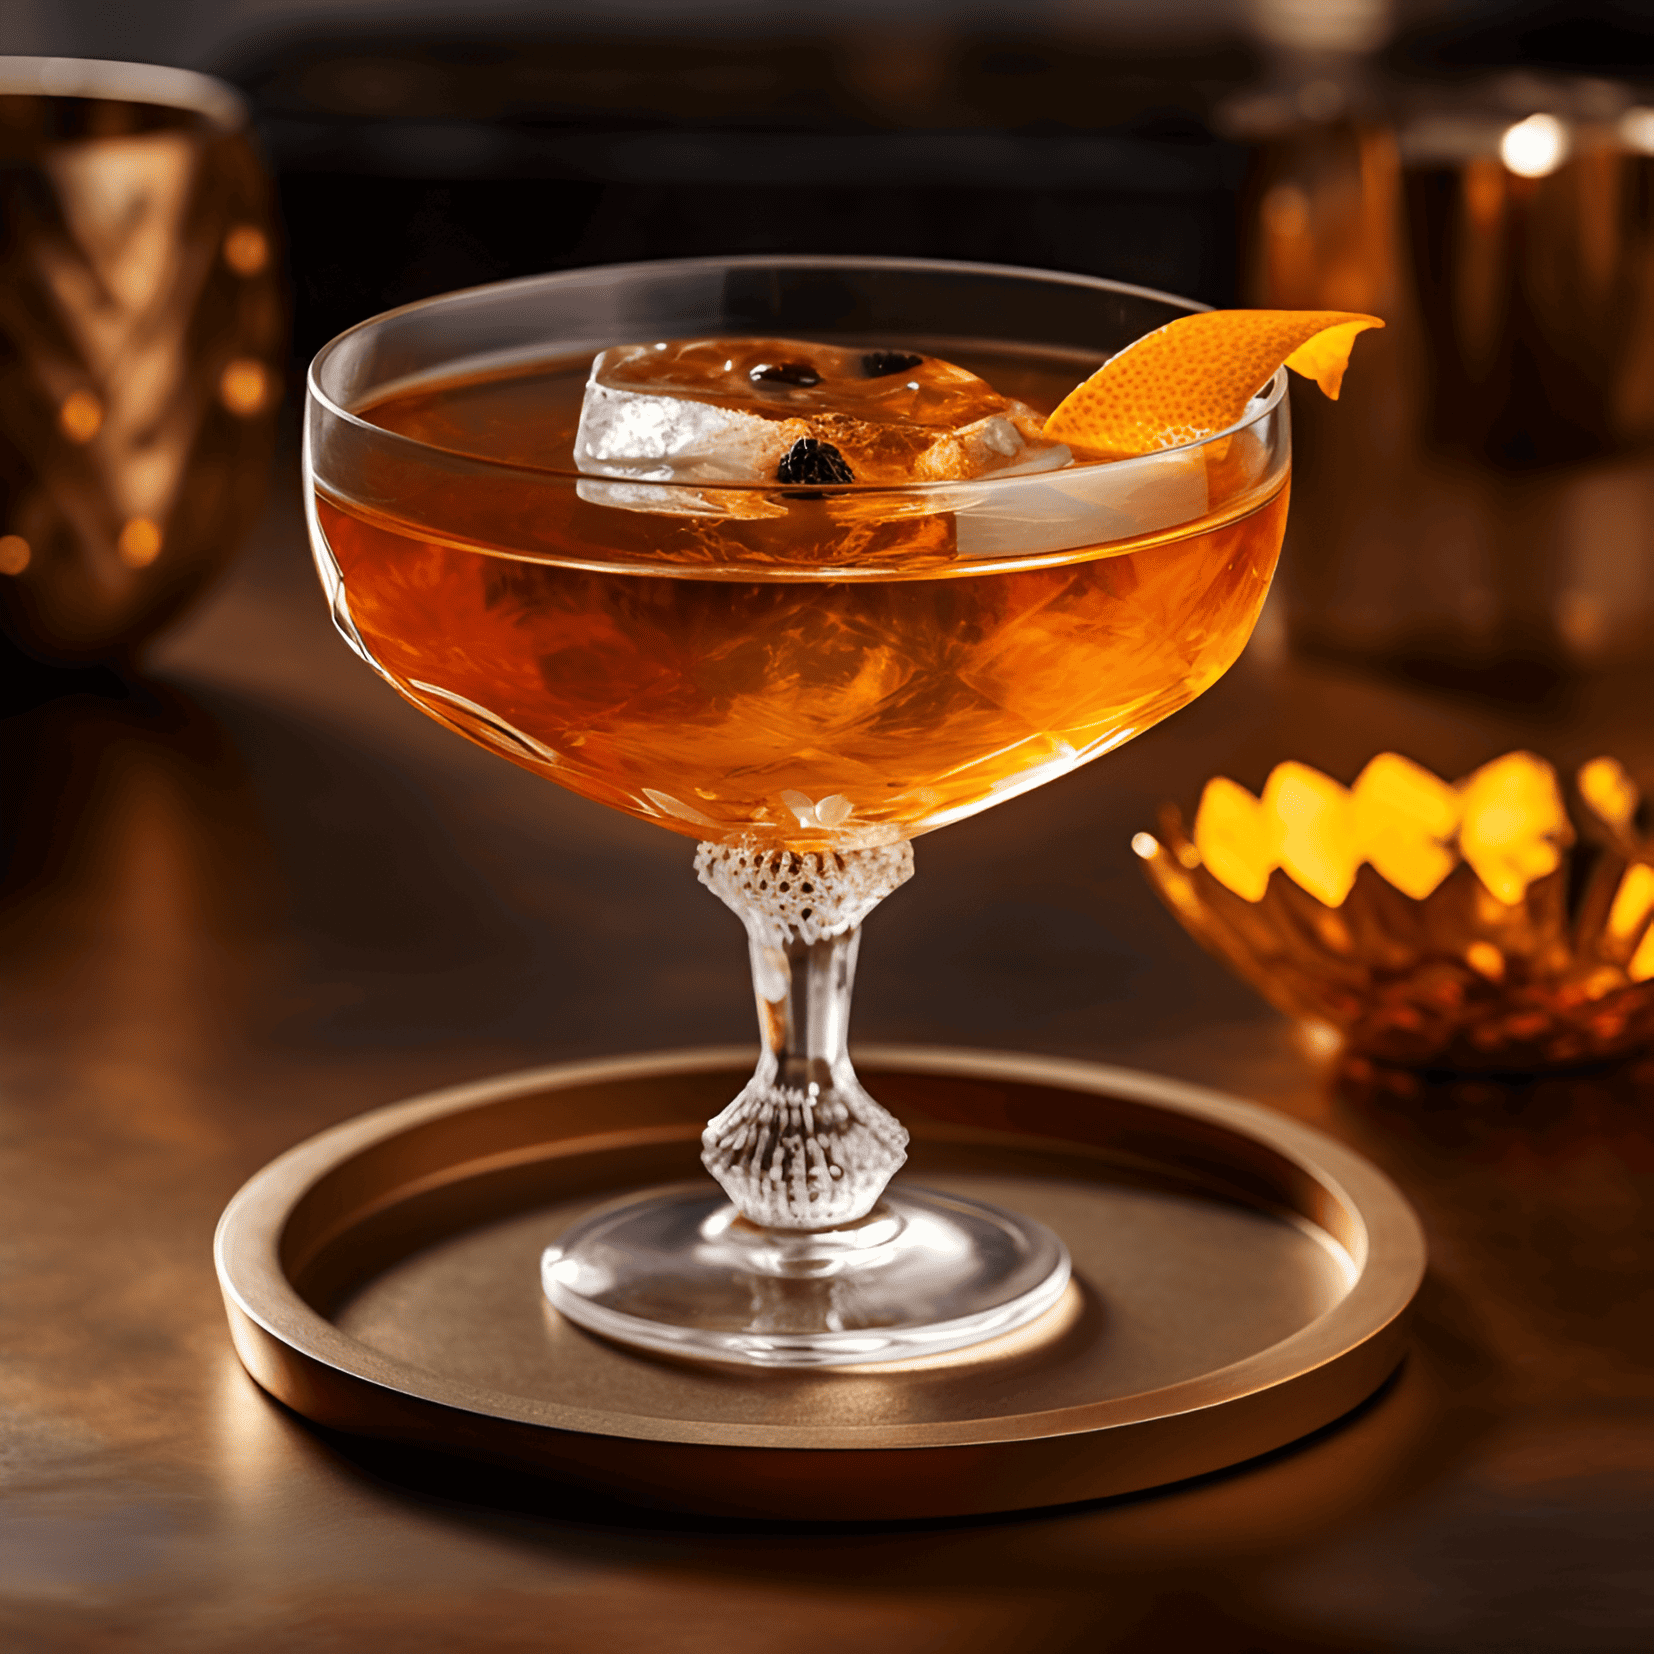 El Presidente Cocktail Recipe - El Presidente is a smooth, well-balanced cocktail with a hint of sweetness and a touch of tartness. The combination of rum, orange curaçao, and vermouth creates a complex flavor profile that is both refreshing and satisfying.